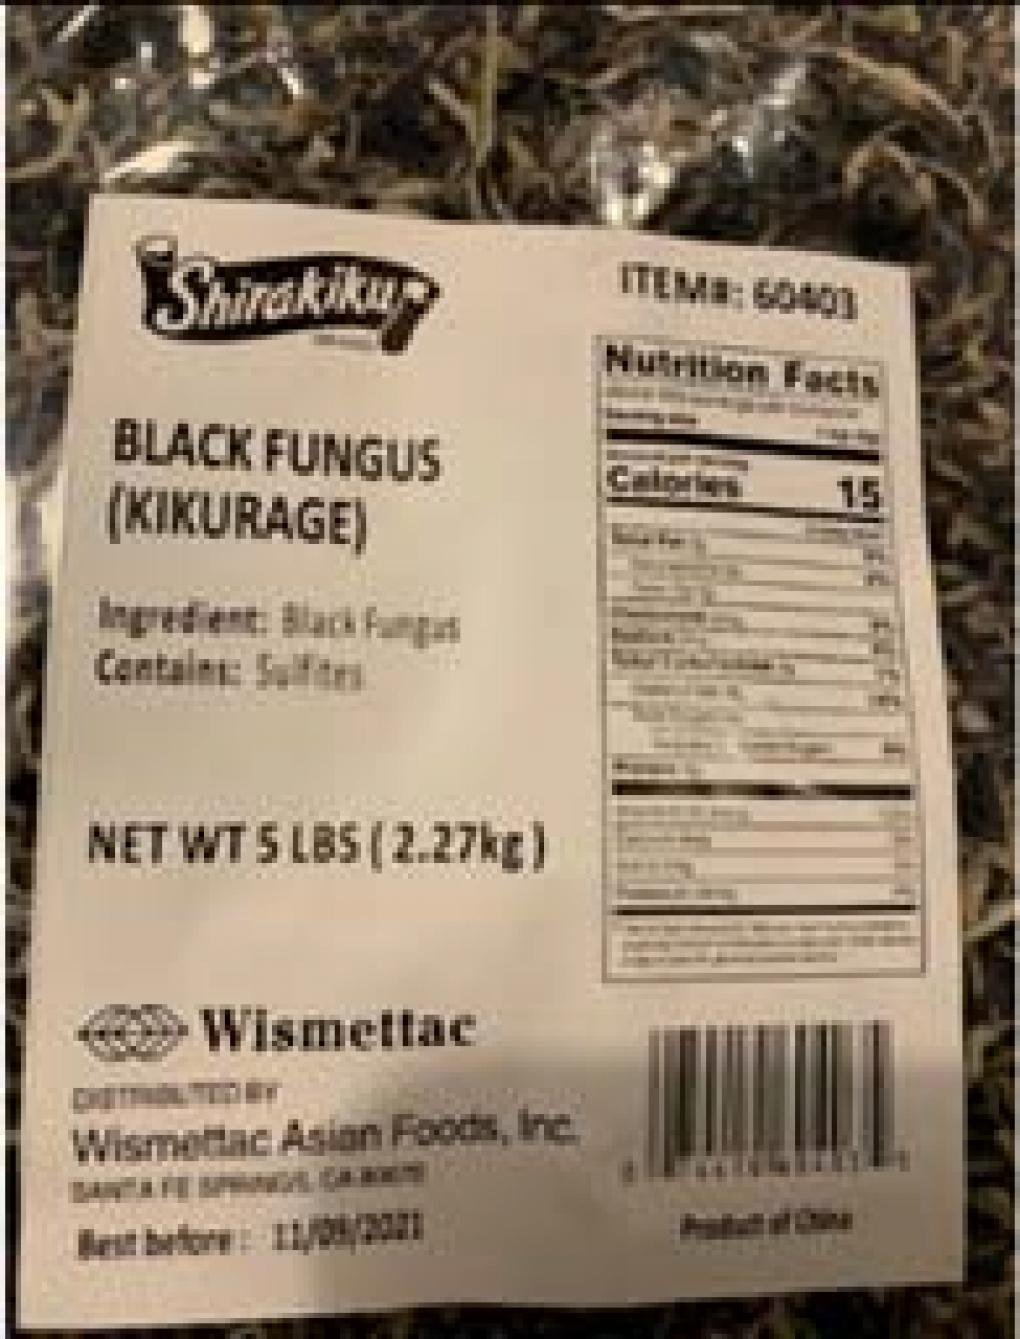 Wismettac Asian Foods Voluntarily Recalls Dried Fungus Due to Salmonella